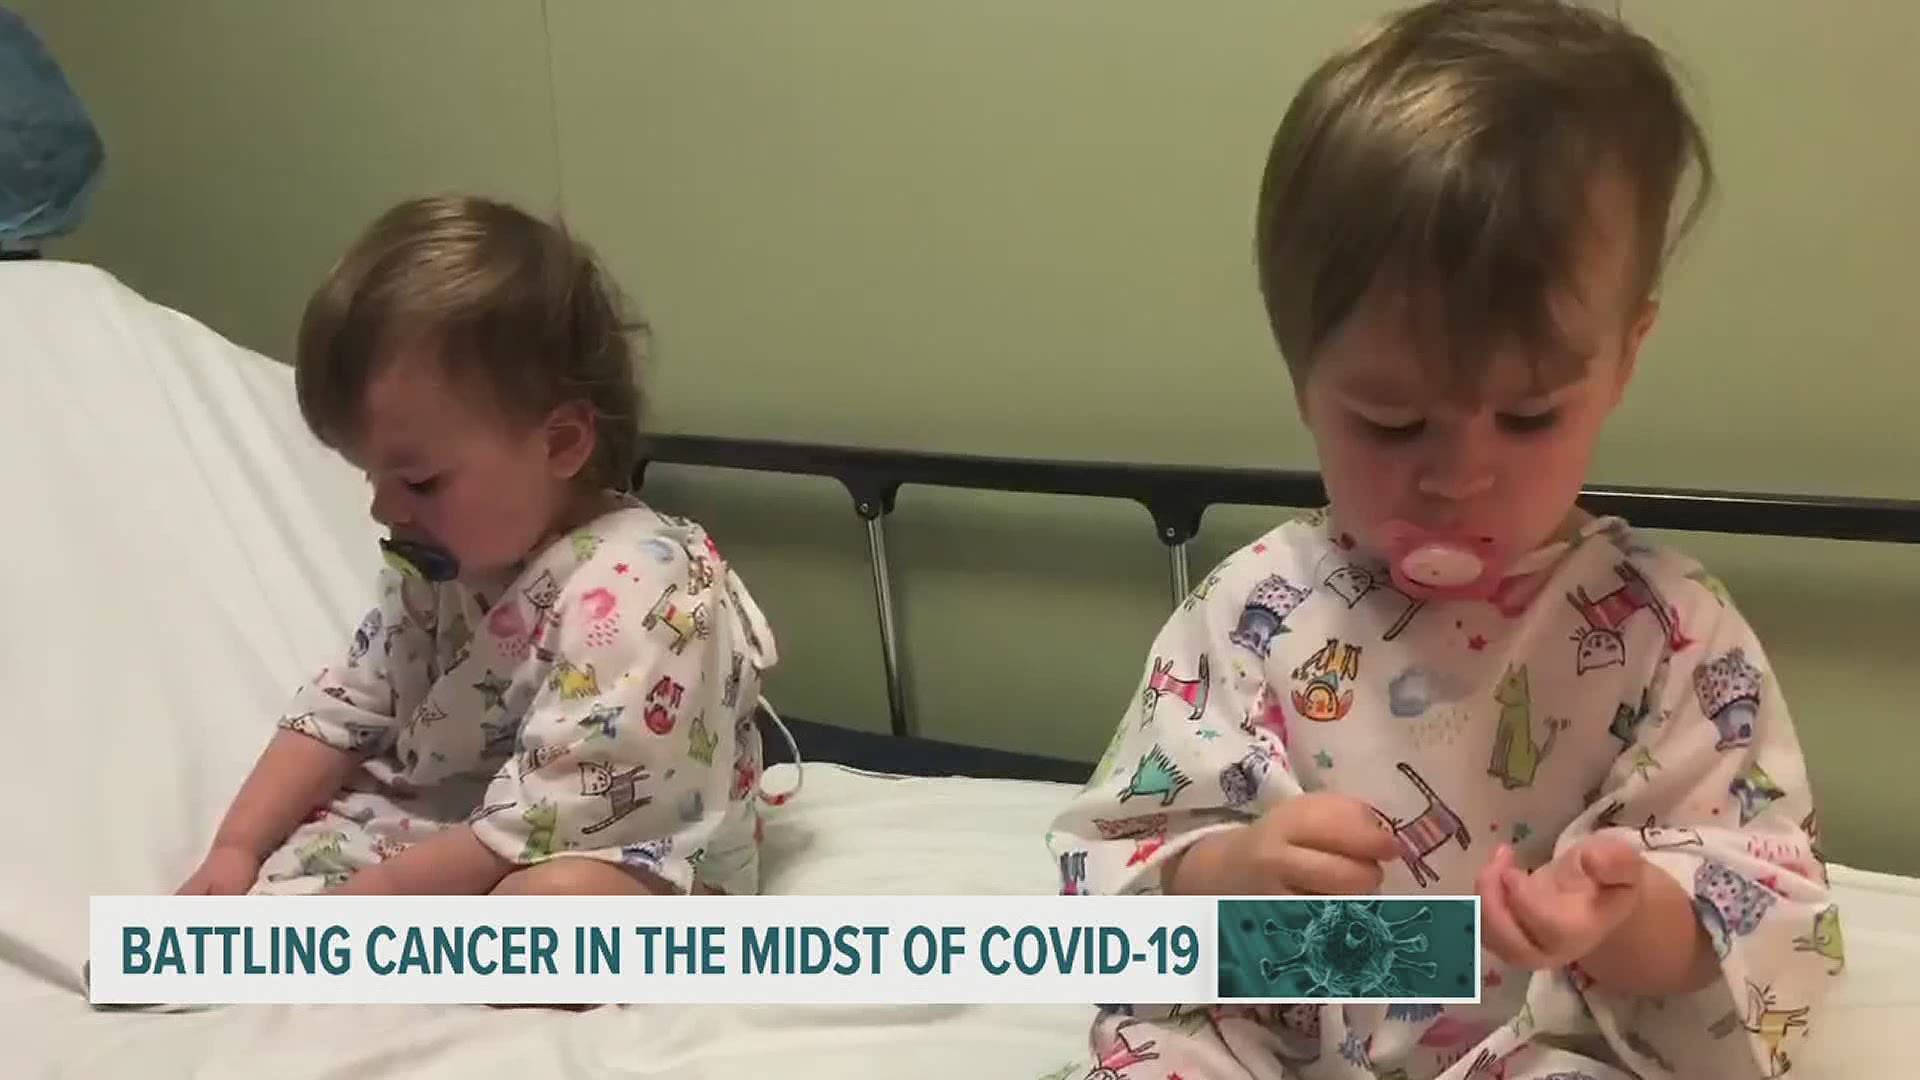 For 2-year-old twins diagnosed with cancer, COVID-19 pandemic poses another  deadly threat 